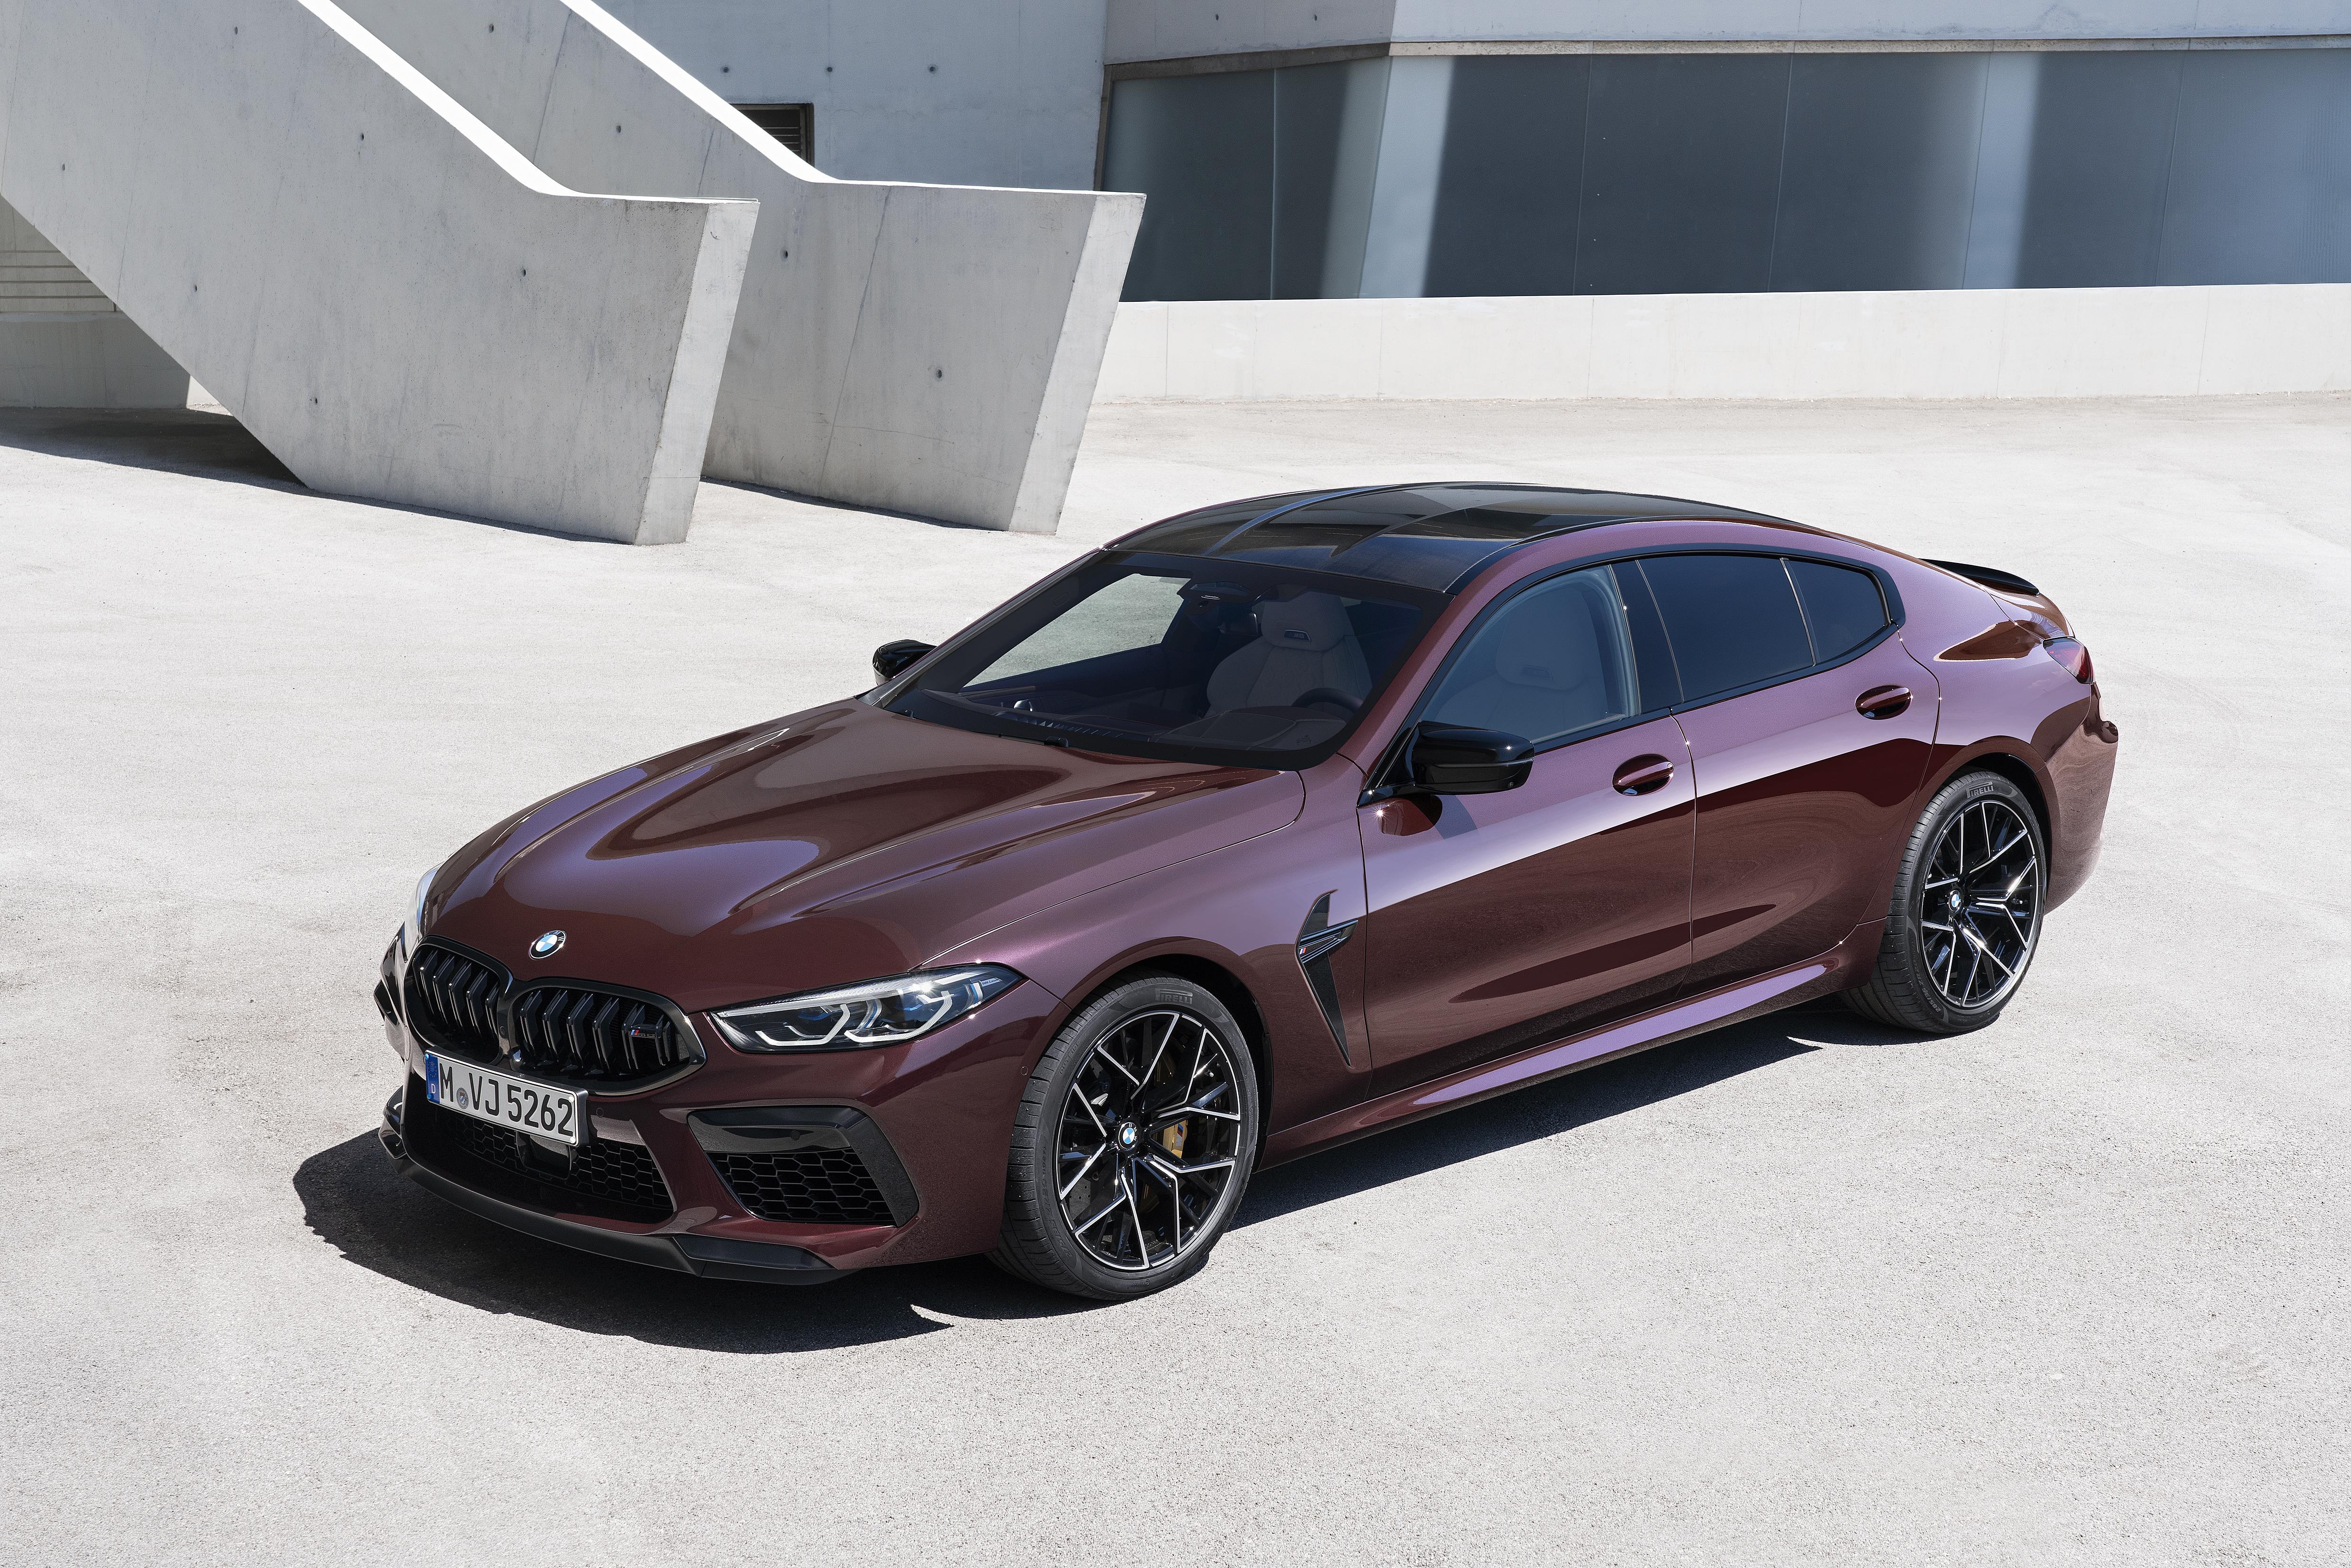 Bmw m 8 competition. BMW m8 Gran Coupe. BMW m8 Coupe 2020. BMW m8 Gran Coupe 2020. BMW m8 Gran Coupe Competition 2020.